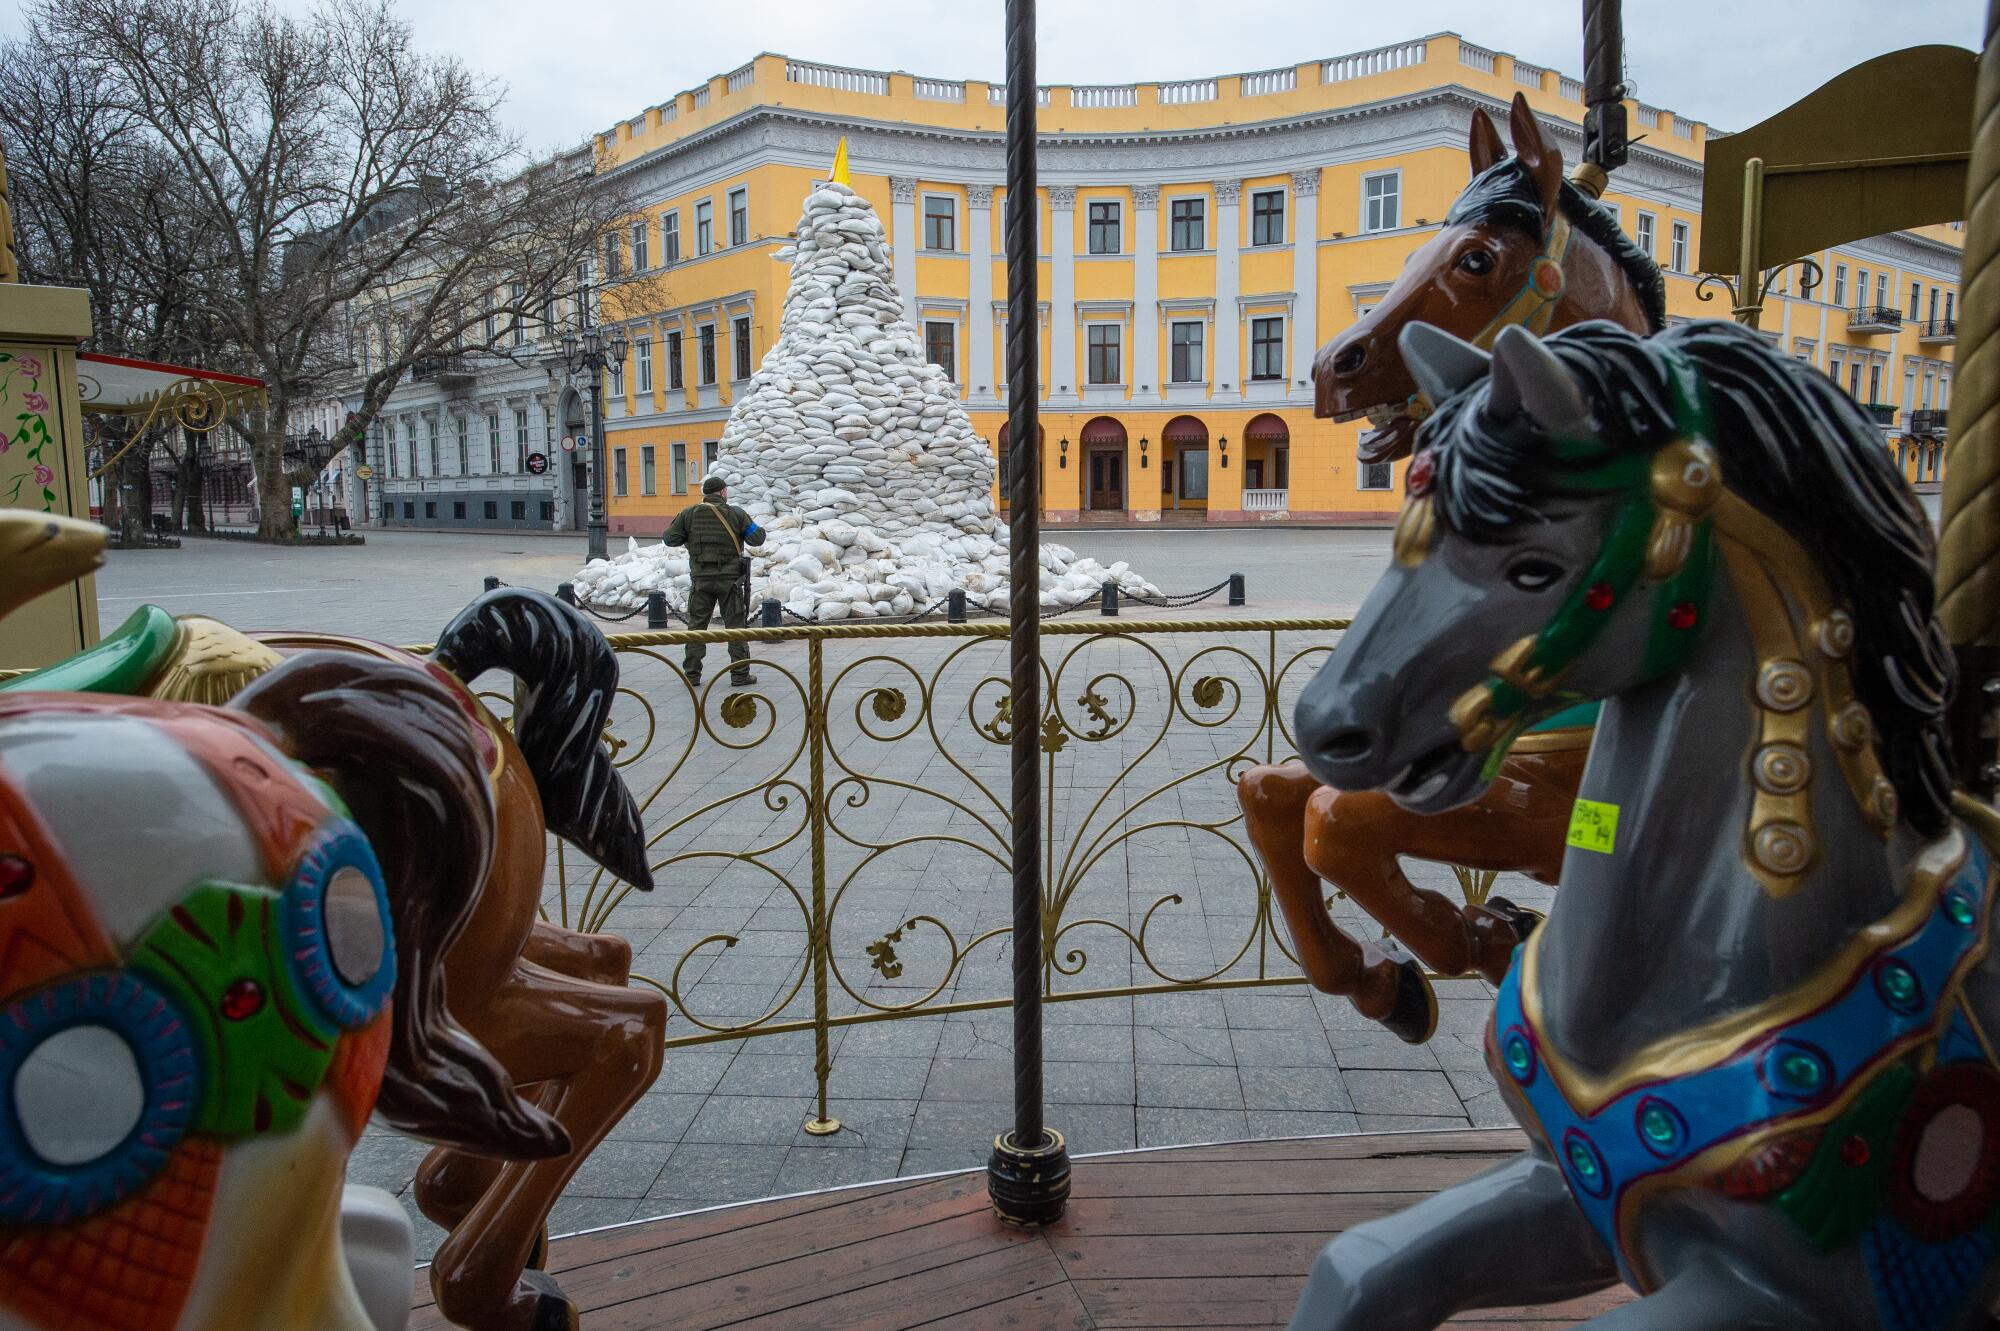 Merry-go-round horses with sandbags in background.